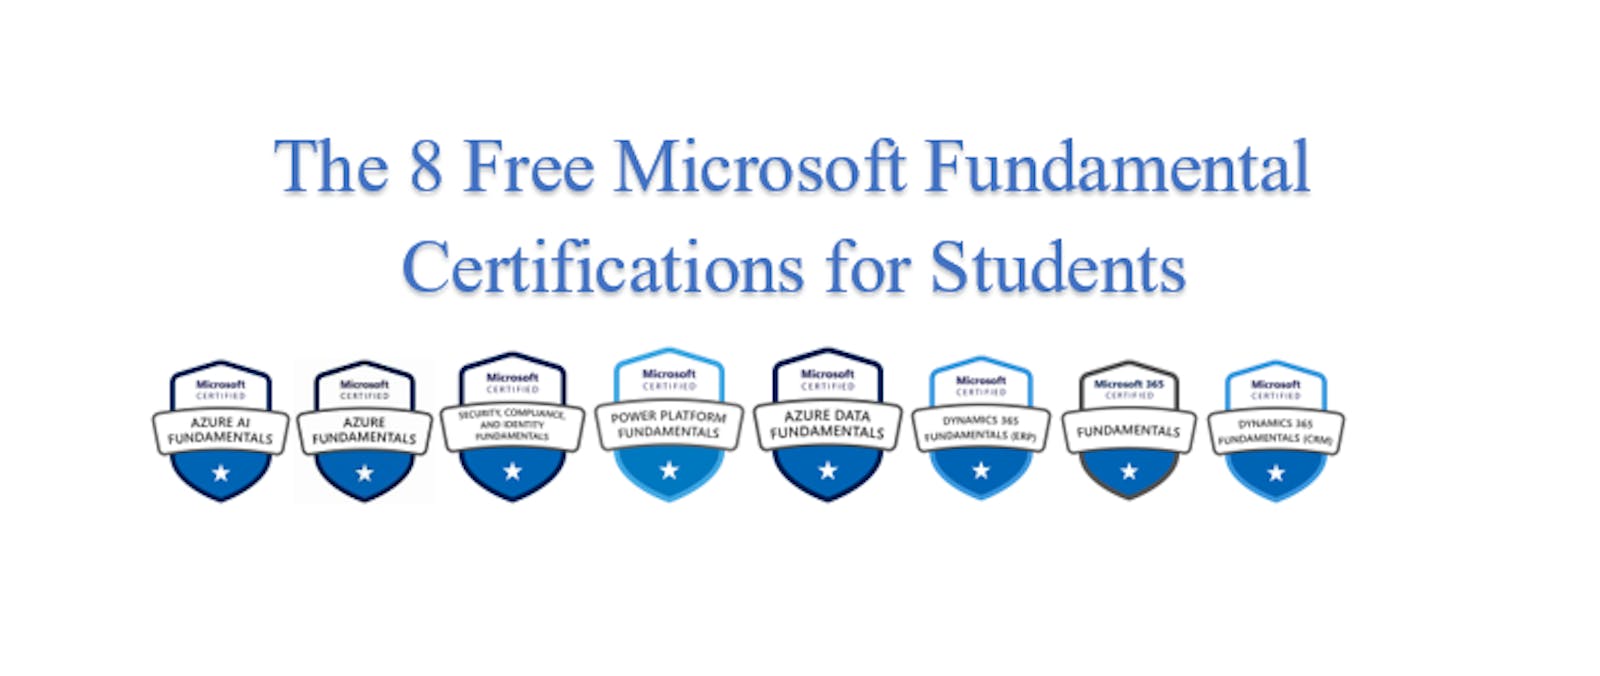 The 8 Free Microsoft Fundamental certifications for students